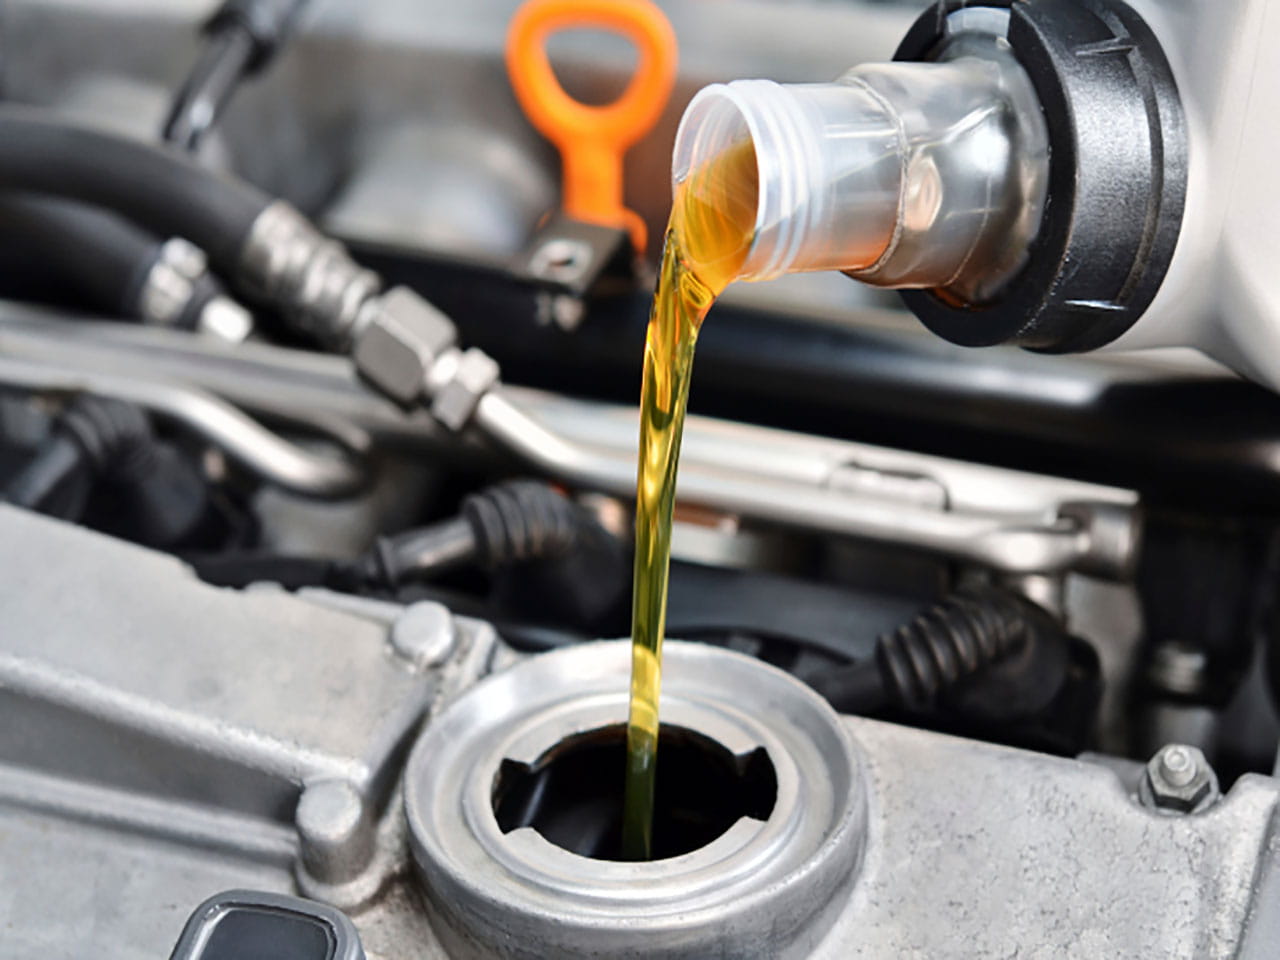 Topping up the oil in a car engine